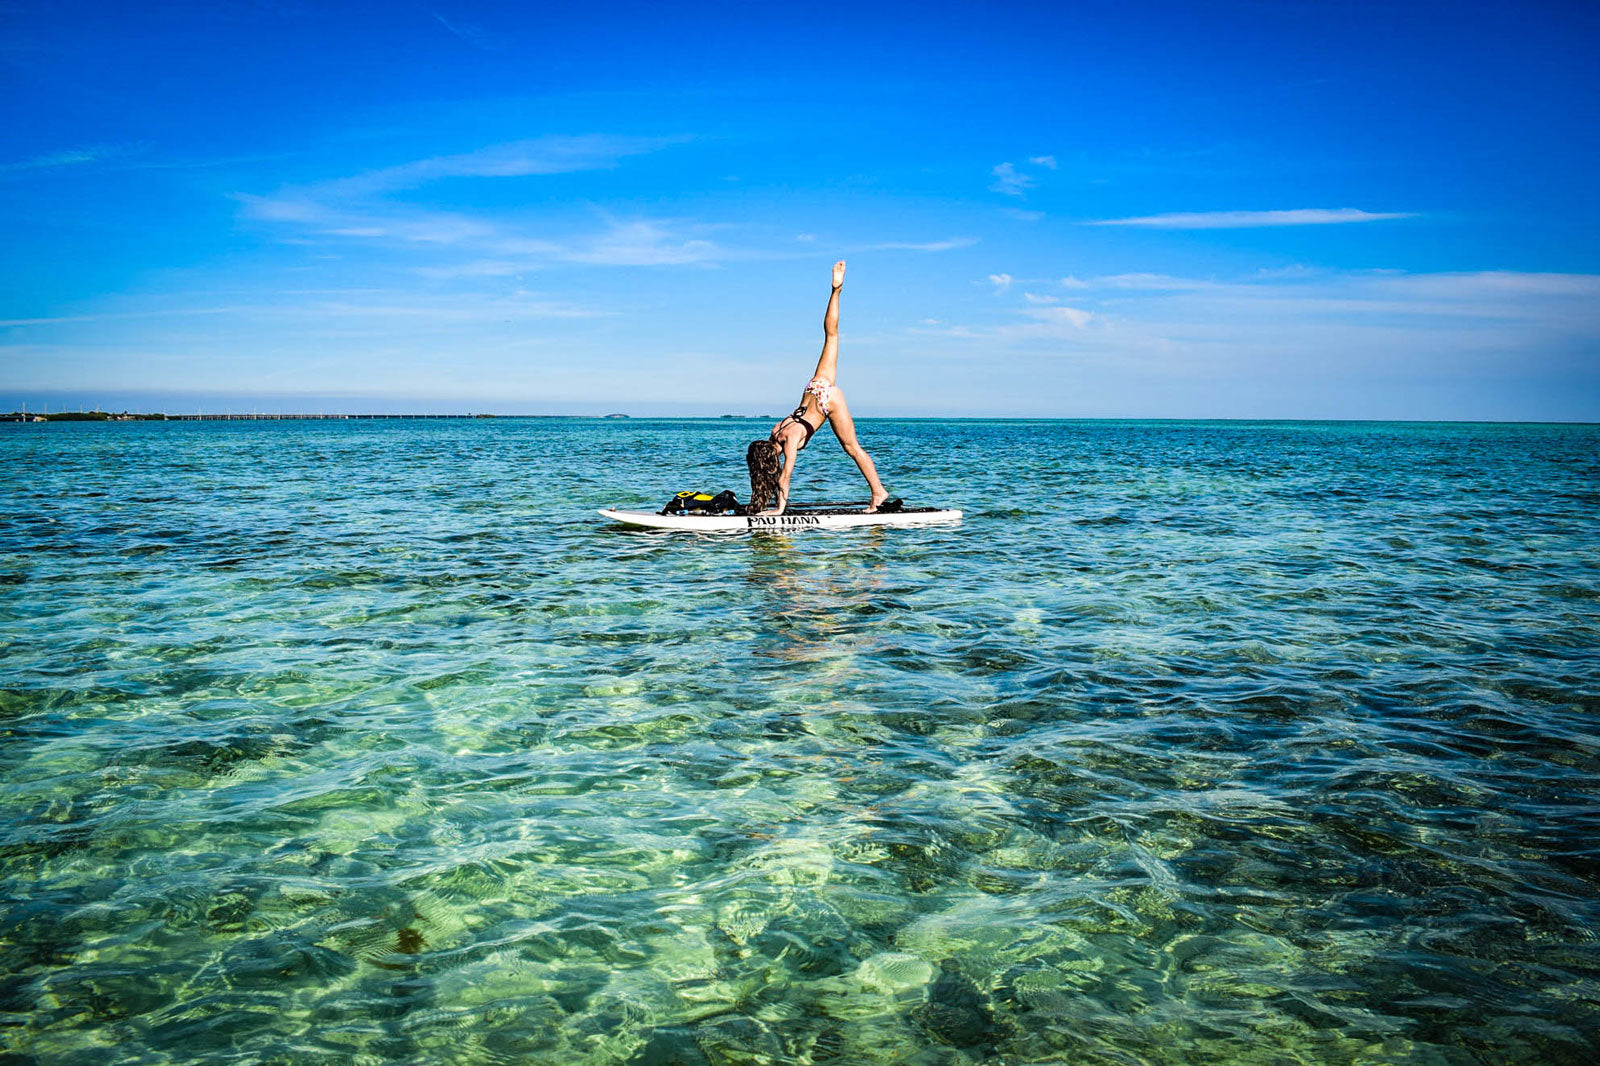 Doing yoga on a paddleboard in the middle of the ocean